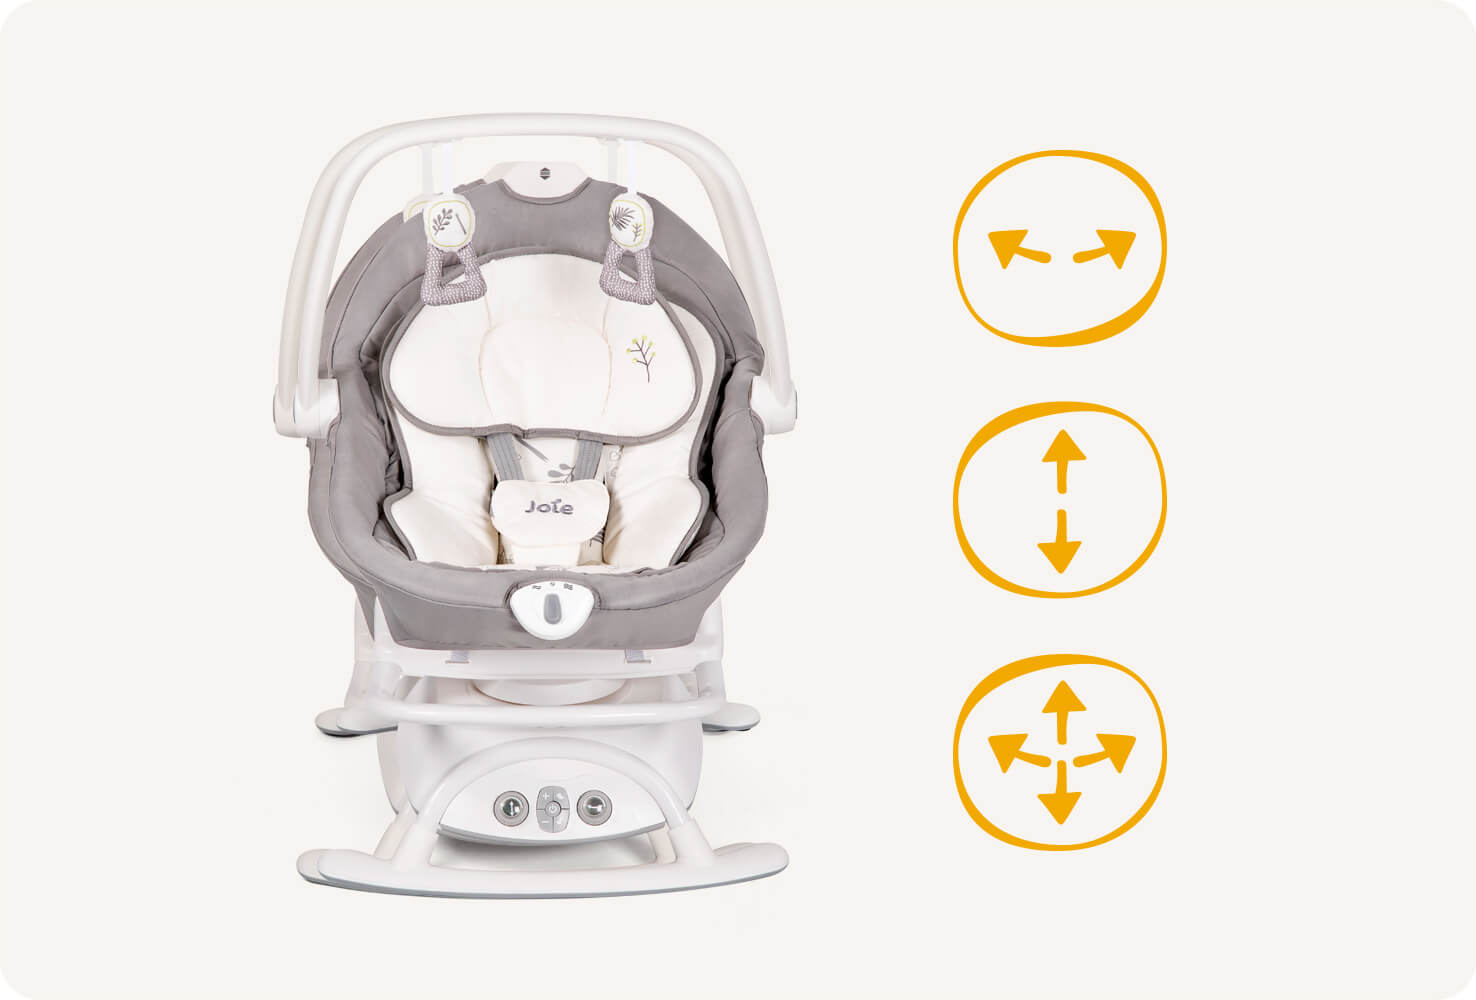 Frontal view of light gray Joie sansa 2in1 swing. To the right of swing, orange circles with arrows represent the multi-motion capabilities of the swing.